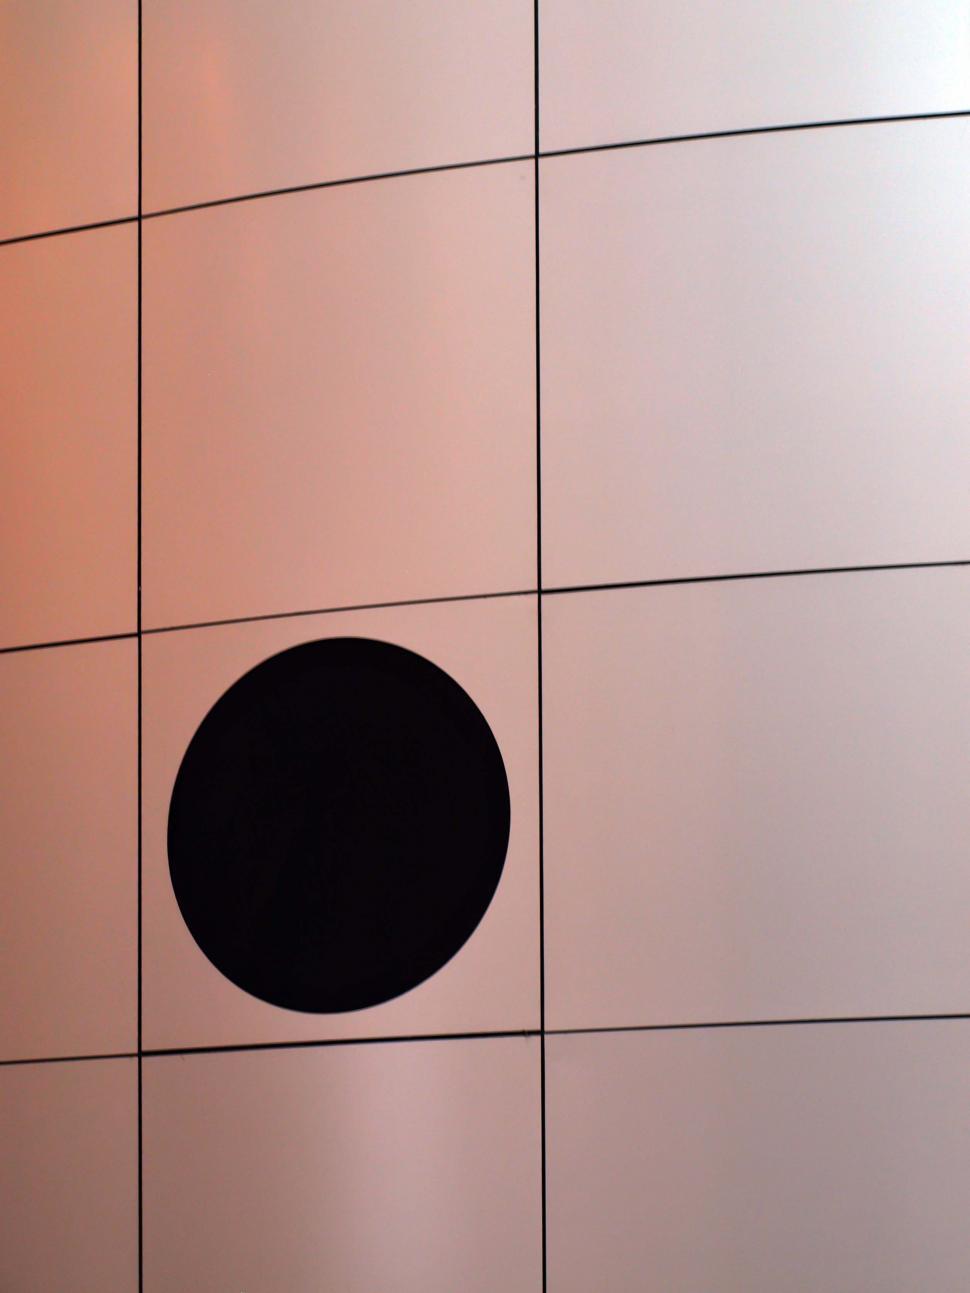 Free Image of Abstract Circle on a Modern Tiled Wall 